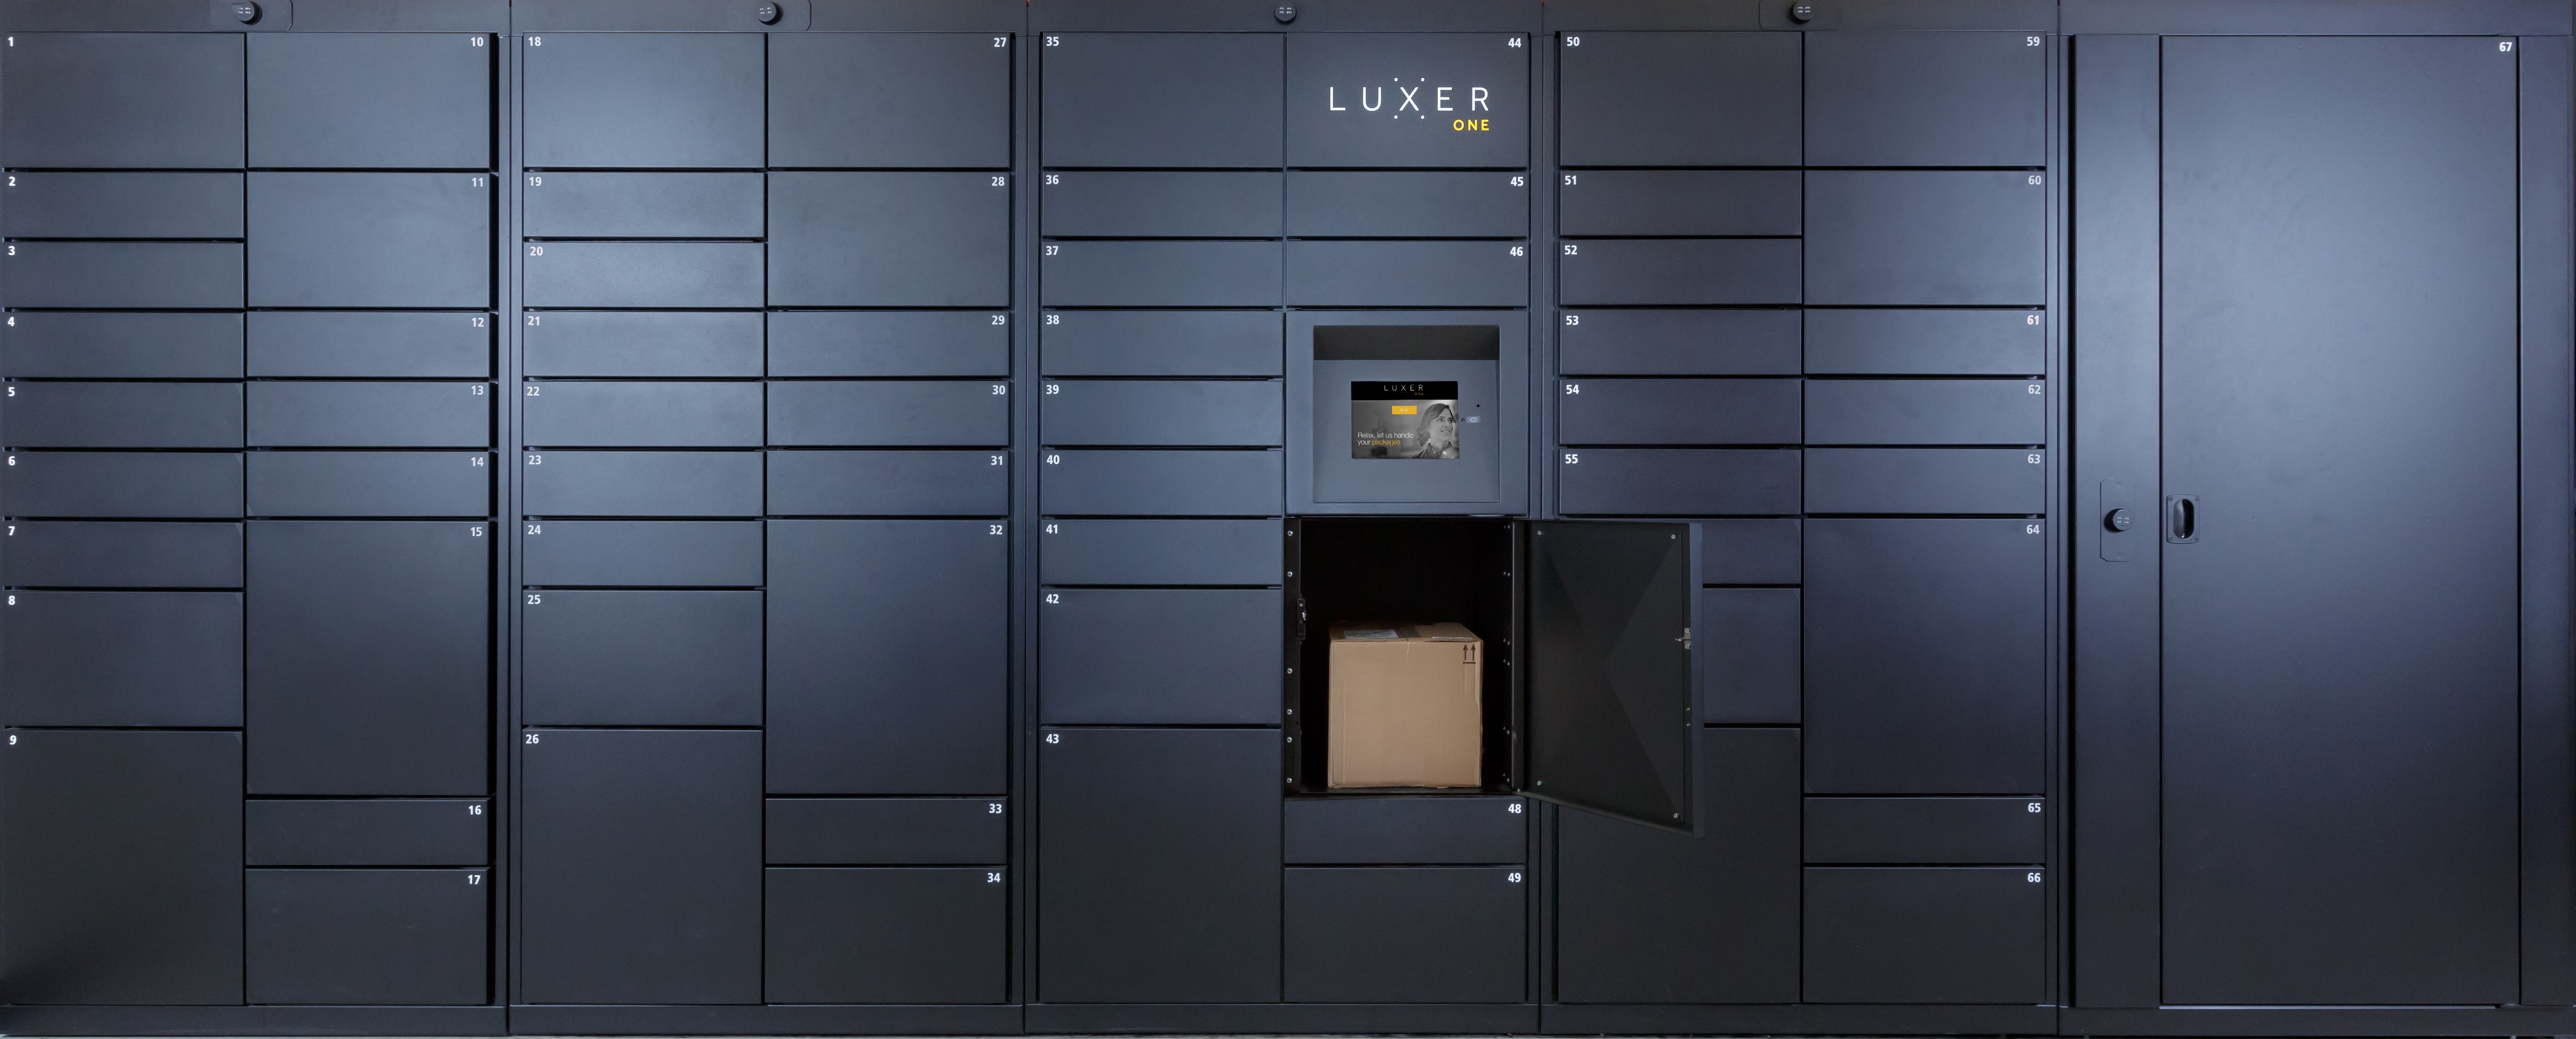 Package Lockers by Luxer One | The Future of Package Delivery